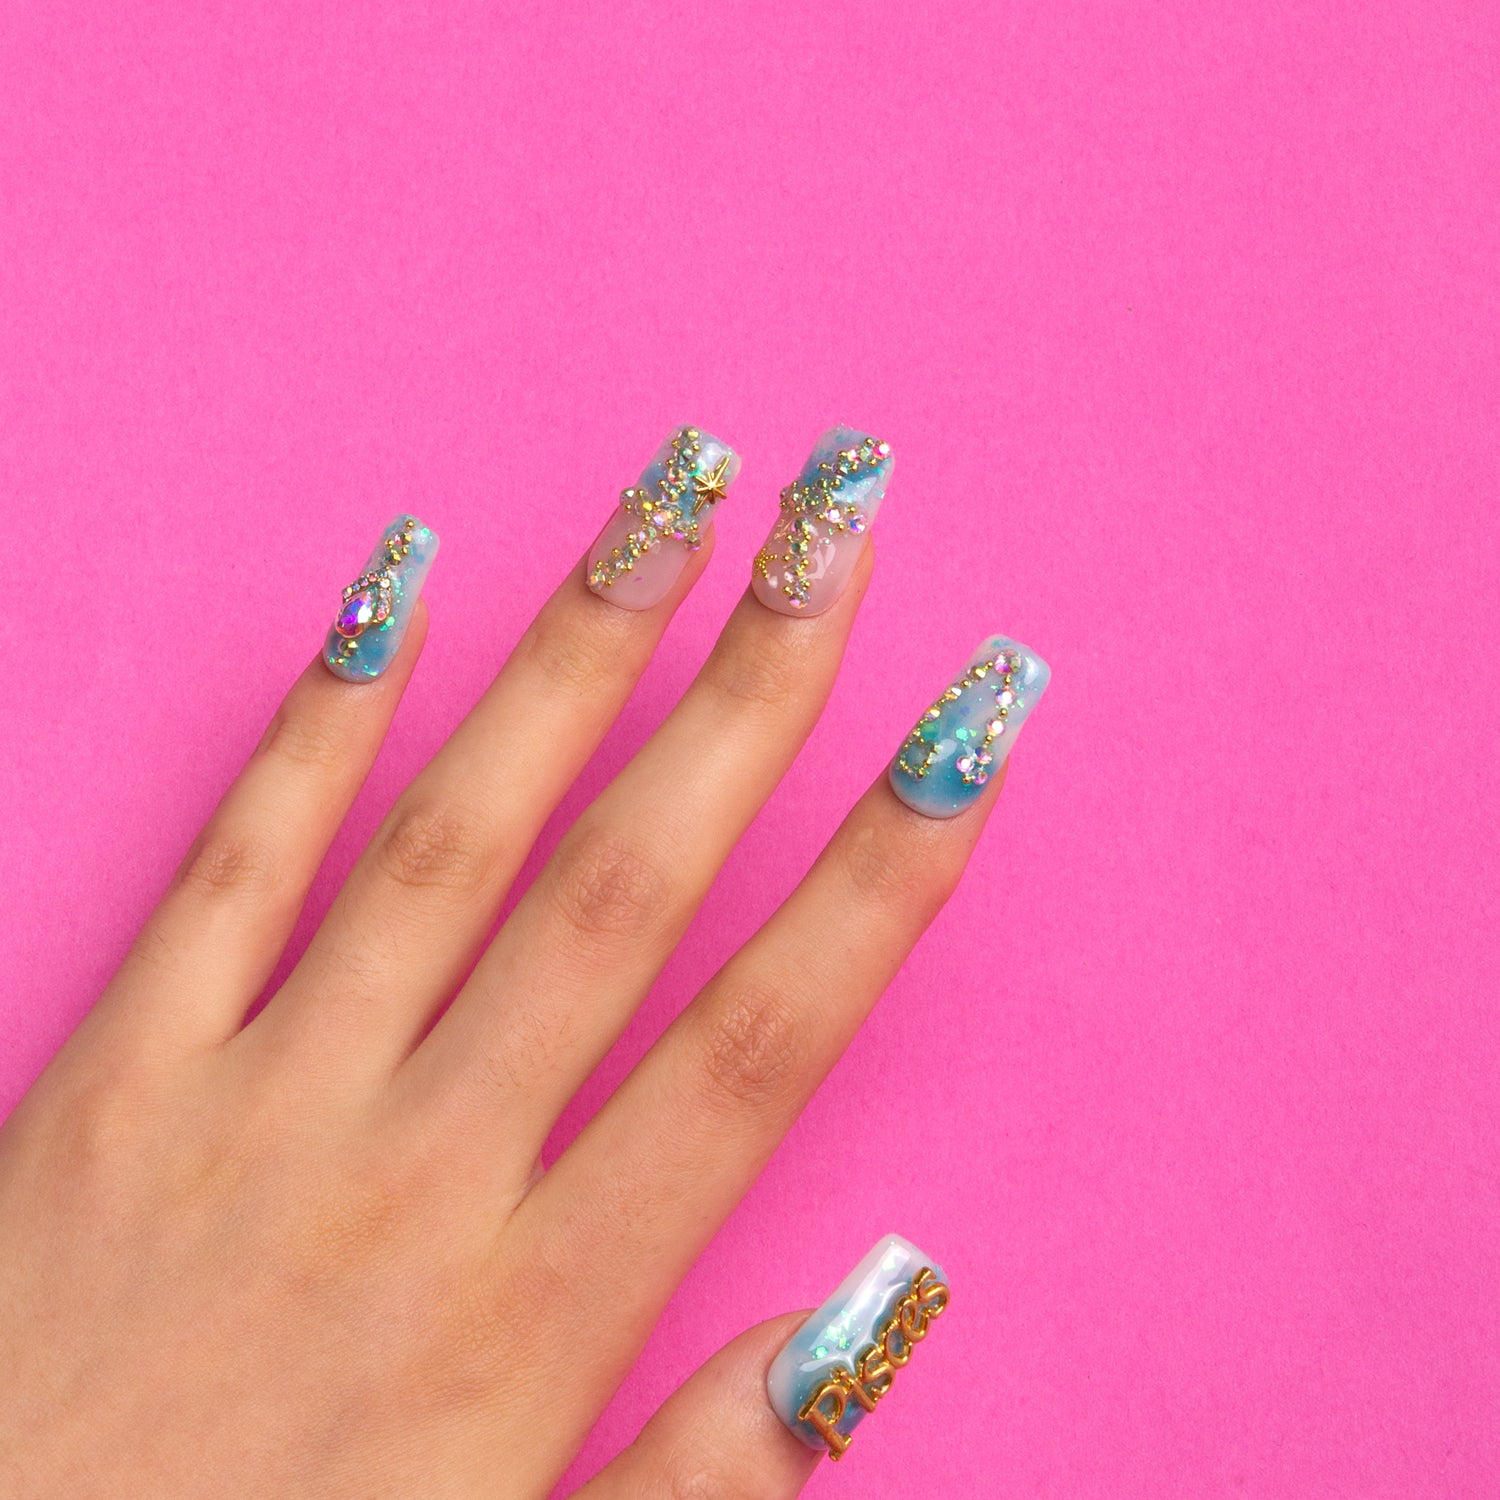 Pisces blue french tip Square nails H157